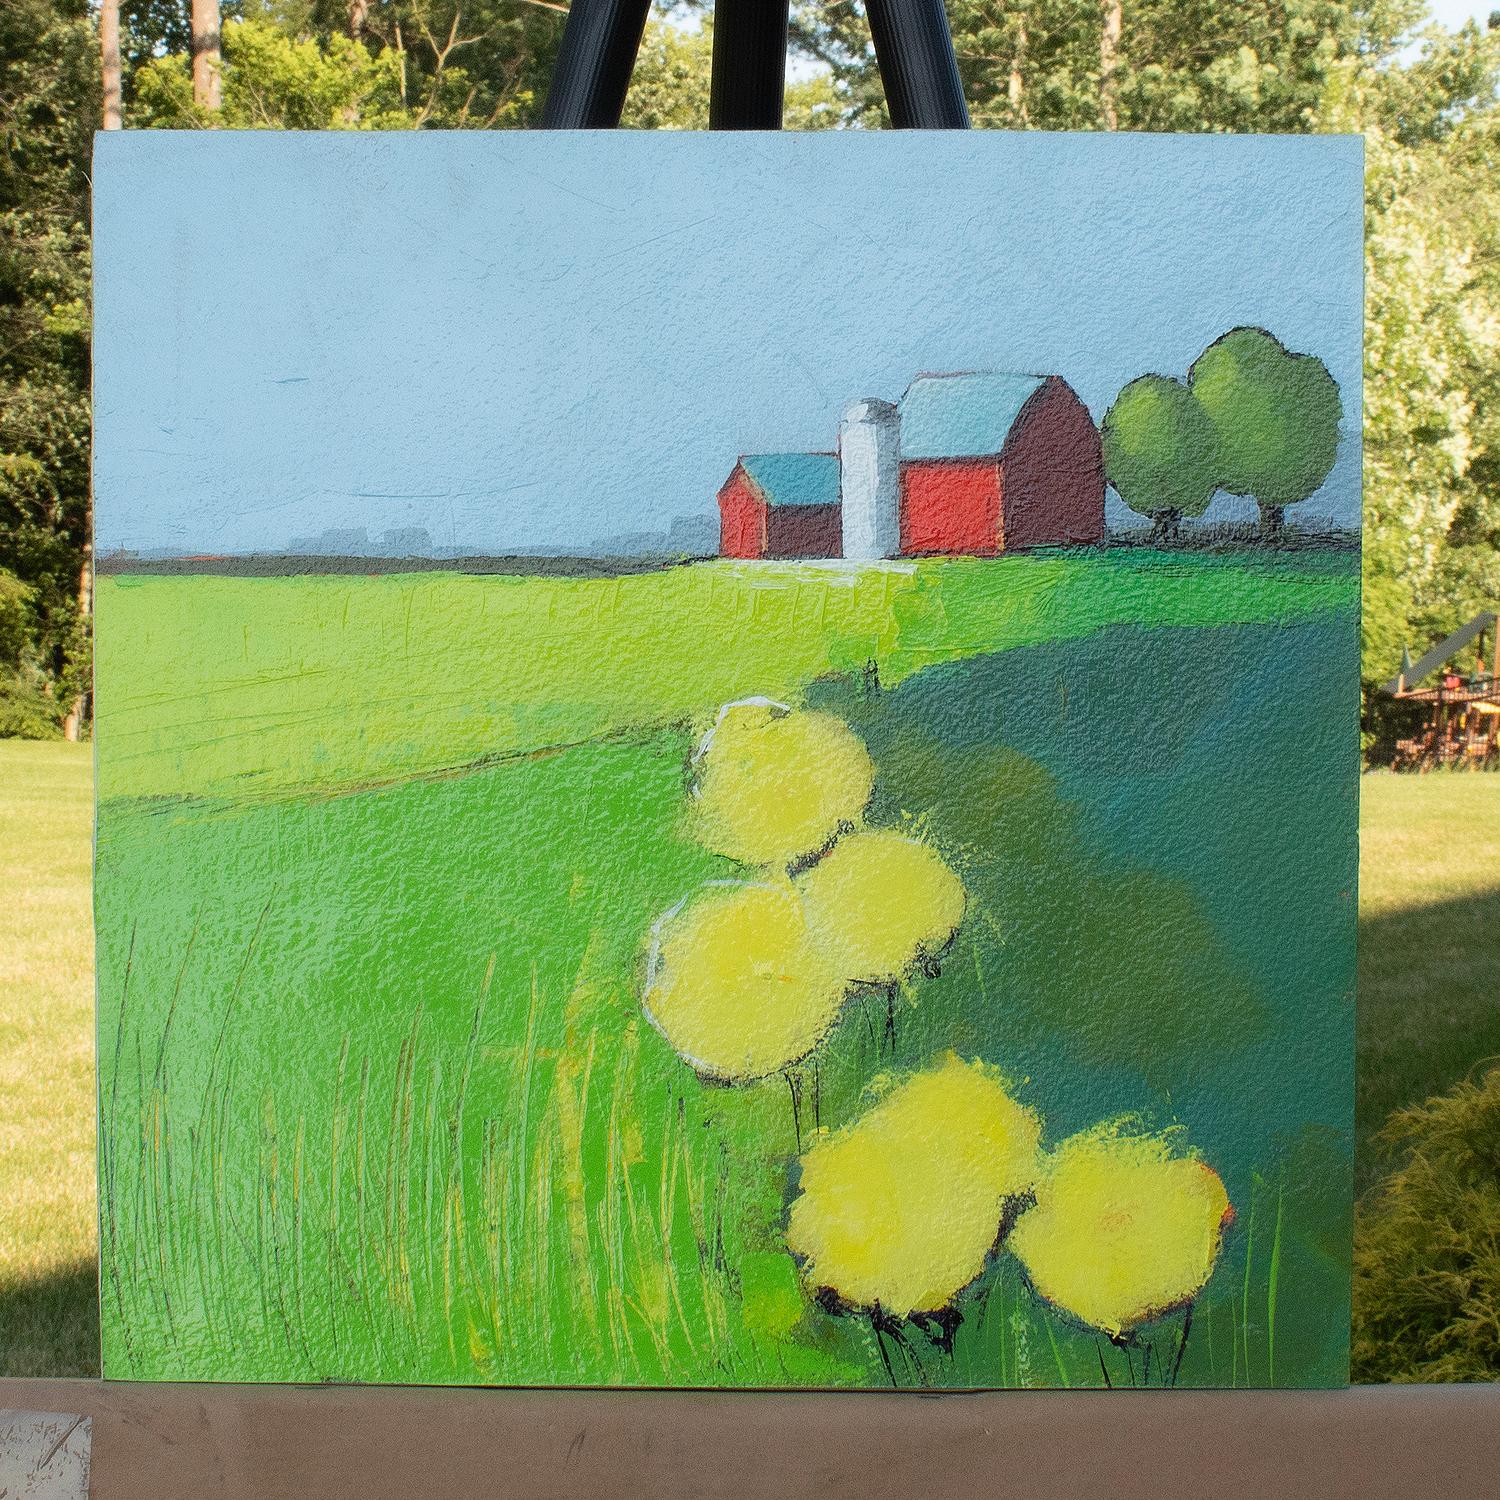 <p>Artist Comments<br>Artist Ruth LaGue shares an idyllic landscape of the lush countryside. Two red barns and a silo stand abreast of verdant trees in the background. Inspired by the shapes and patterns of the field of dandelions, Ruth draws the